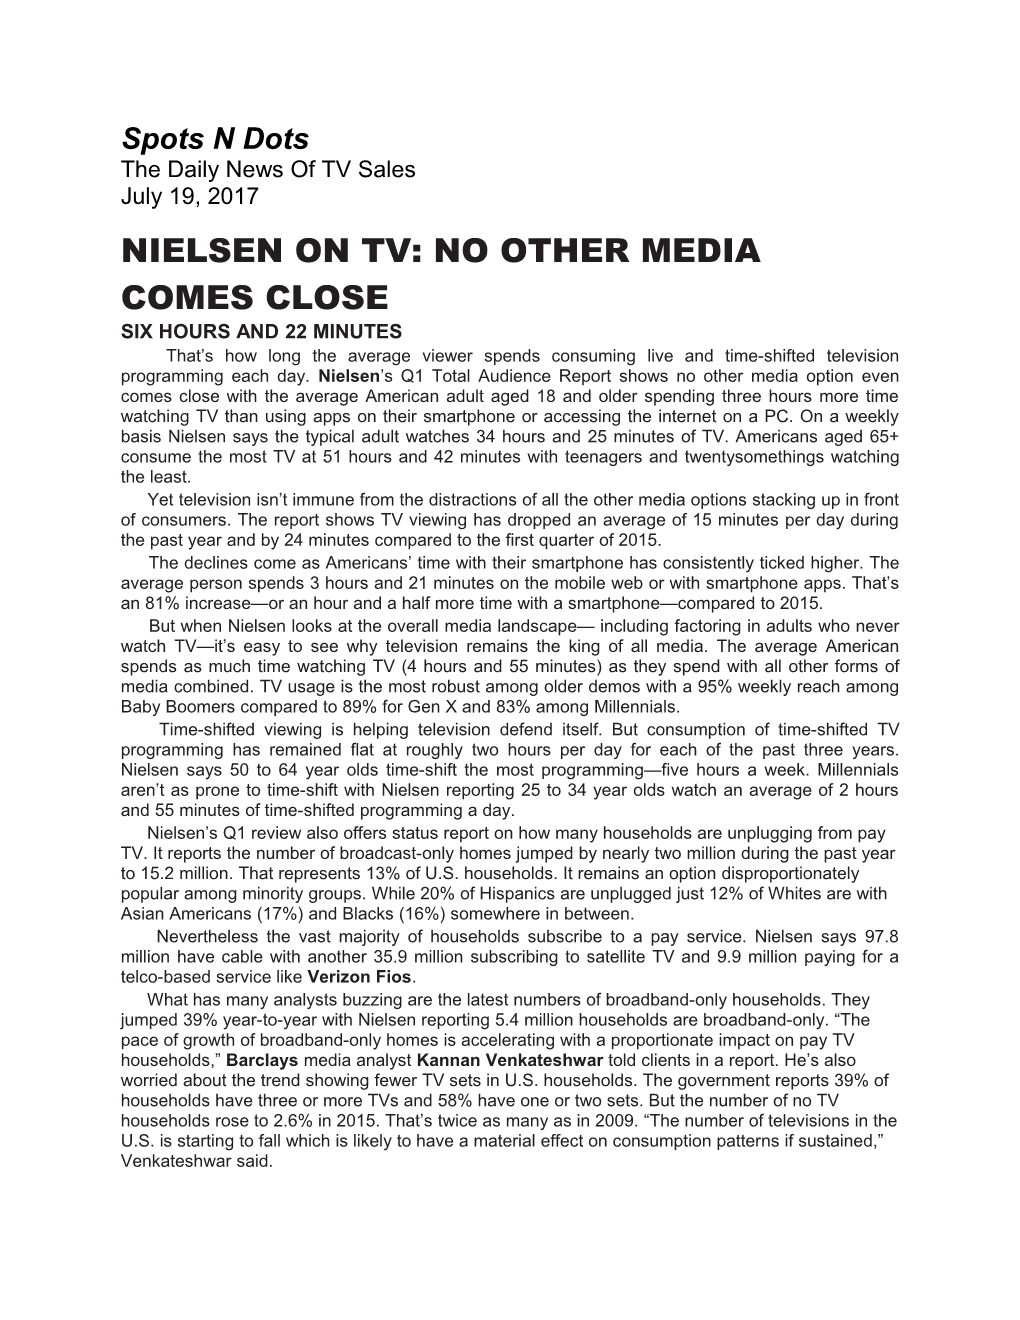 Nielsen on Tv: No Other Media Comes Close